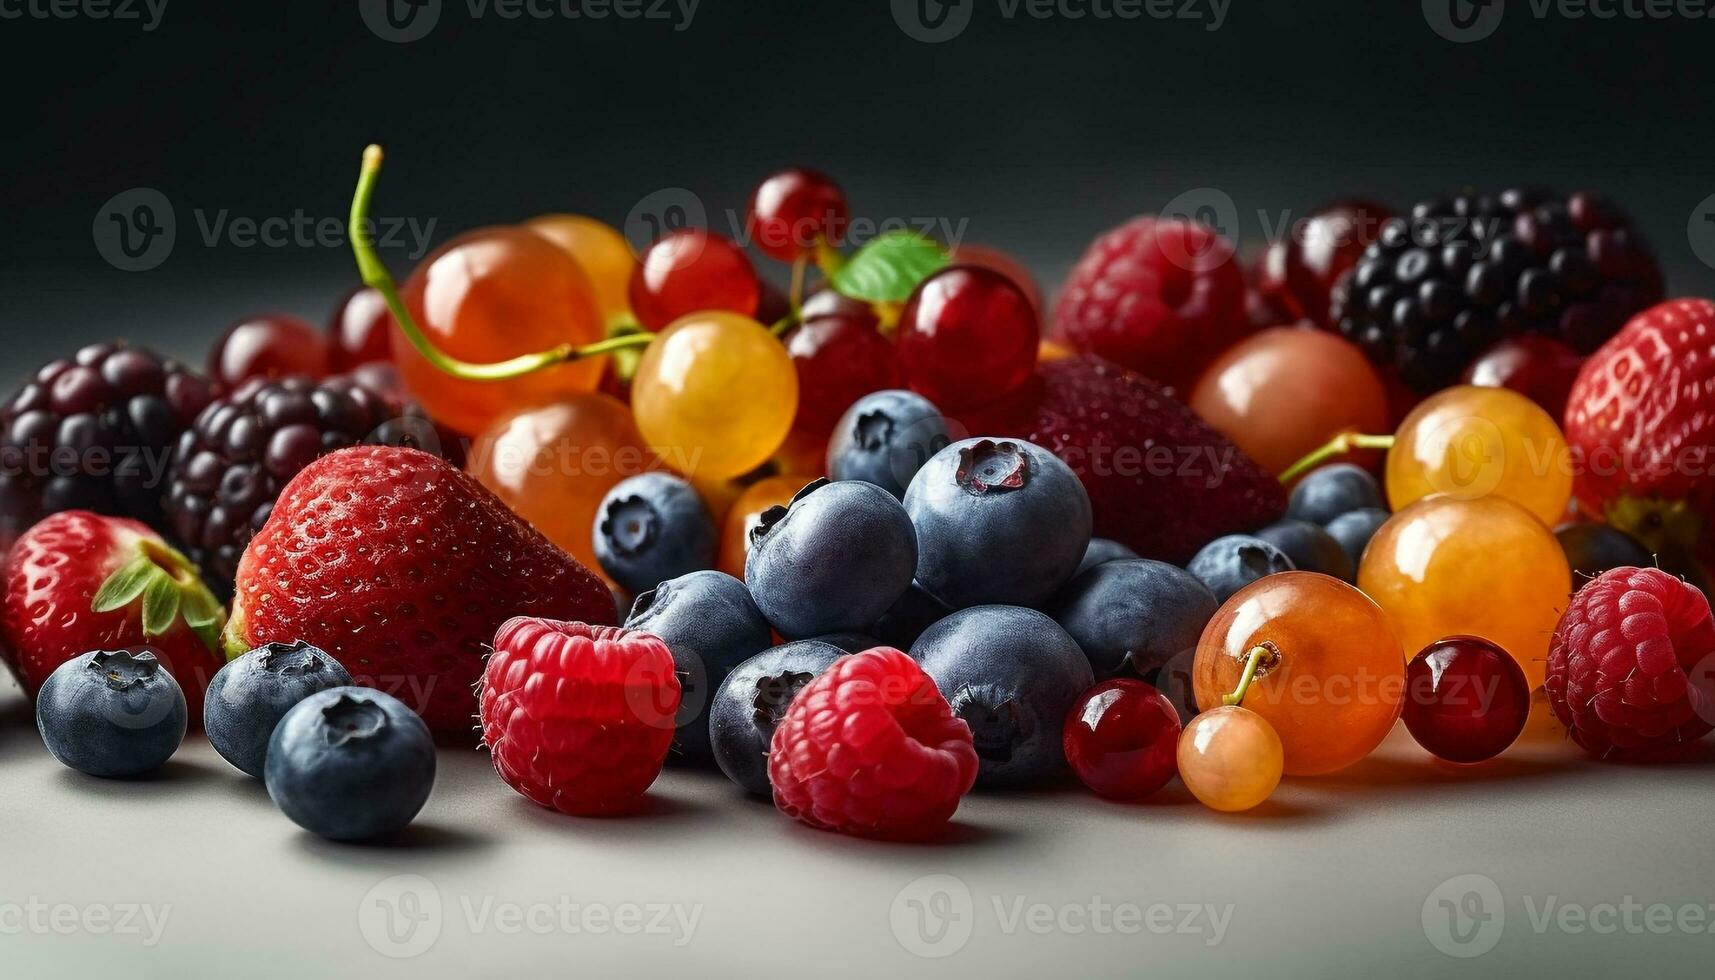 A bowl of juicy, ripe berries a gourmet dessert generated by AI photo